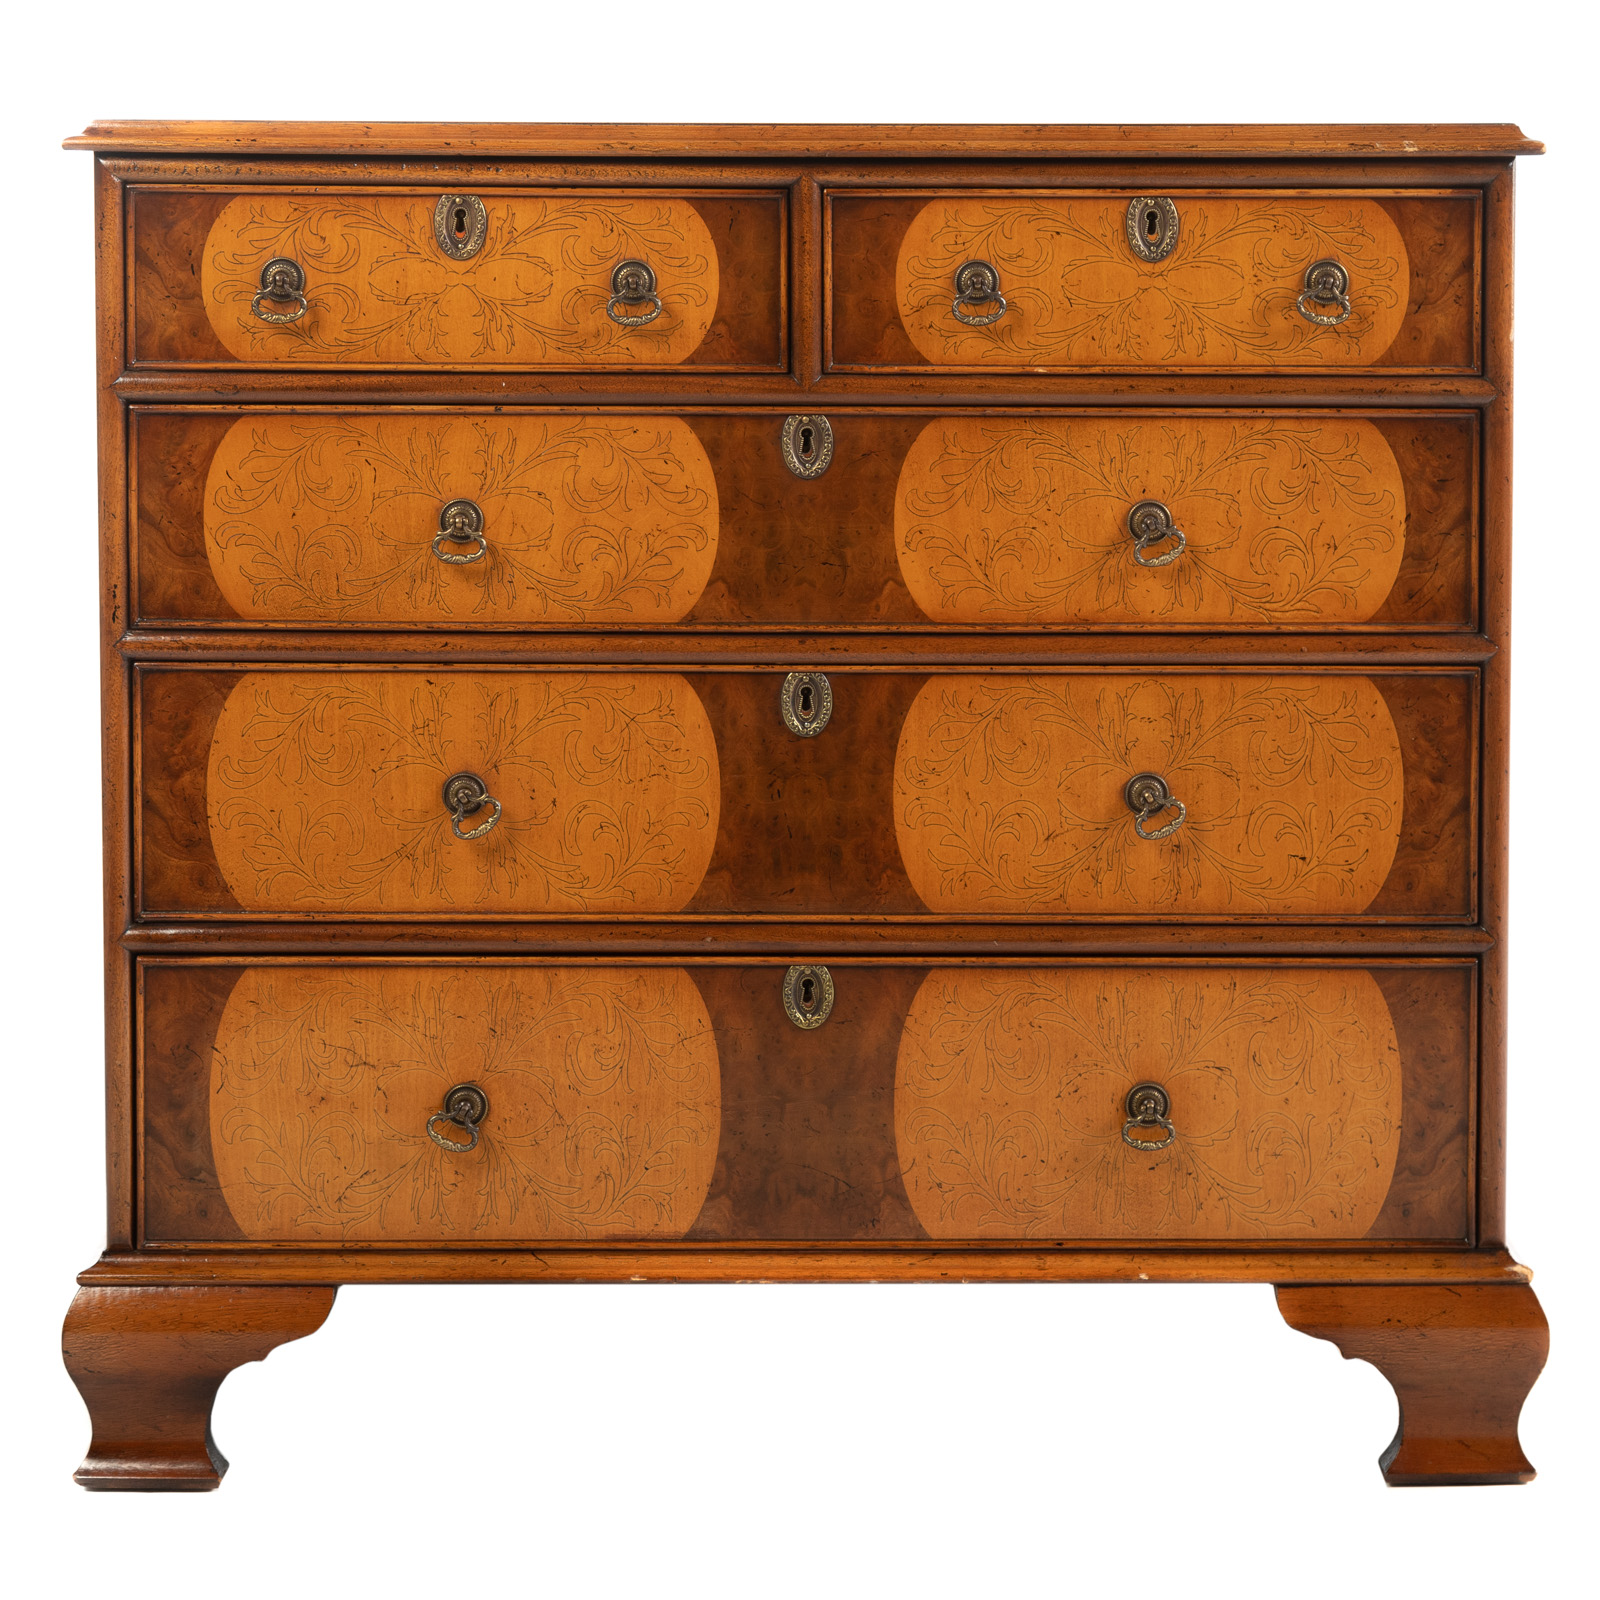 GEORGIAN STYLE INLAID CHEST OF 36a9aa